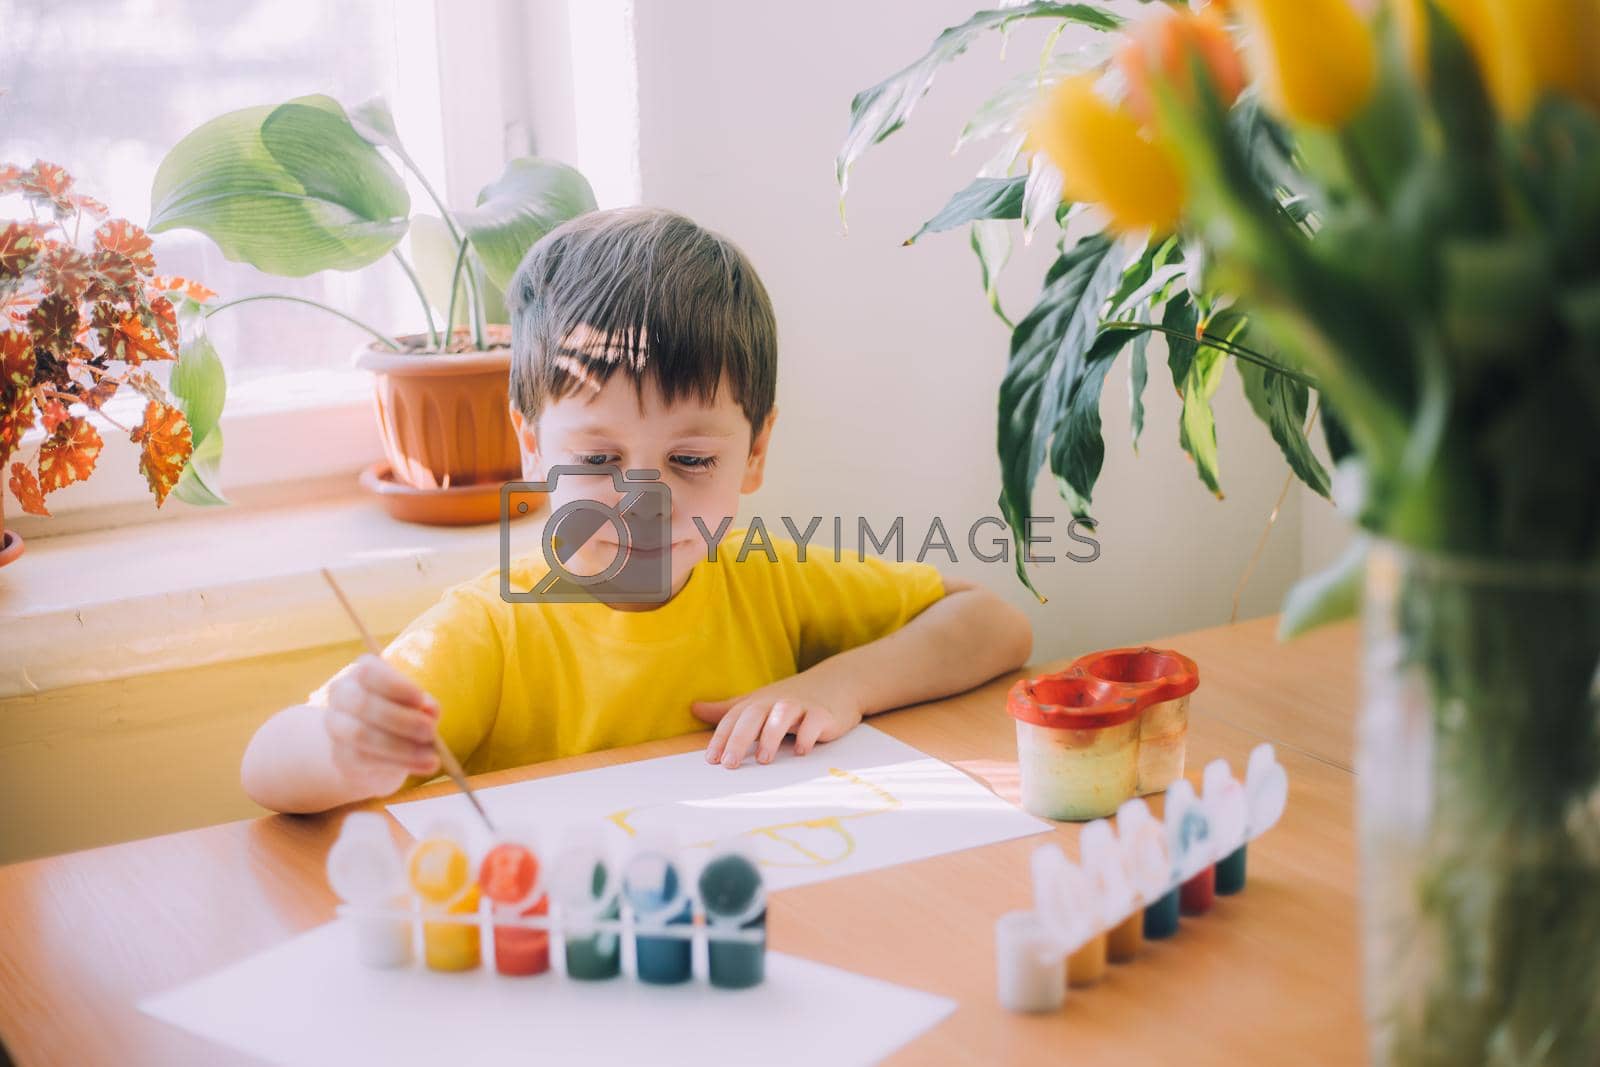 The boy paints a lifestyle . Children's hobby. Leisure at home. Children's drawings. Psychology of children's drawings. Child development.